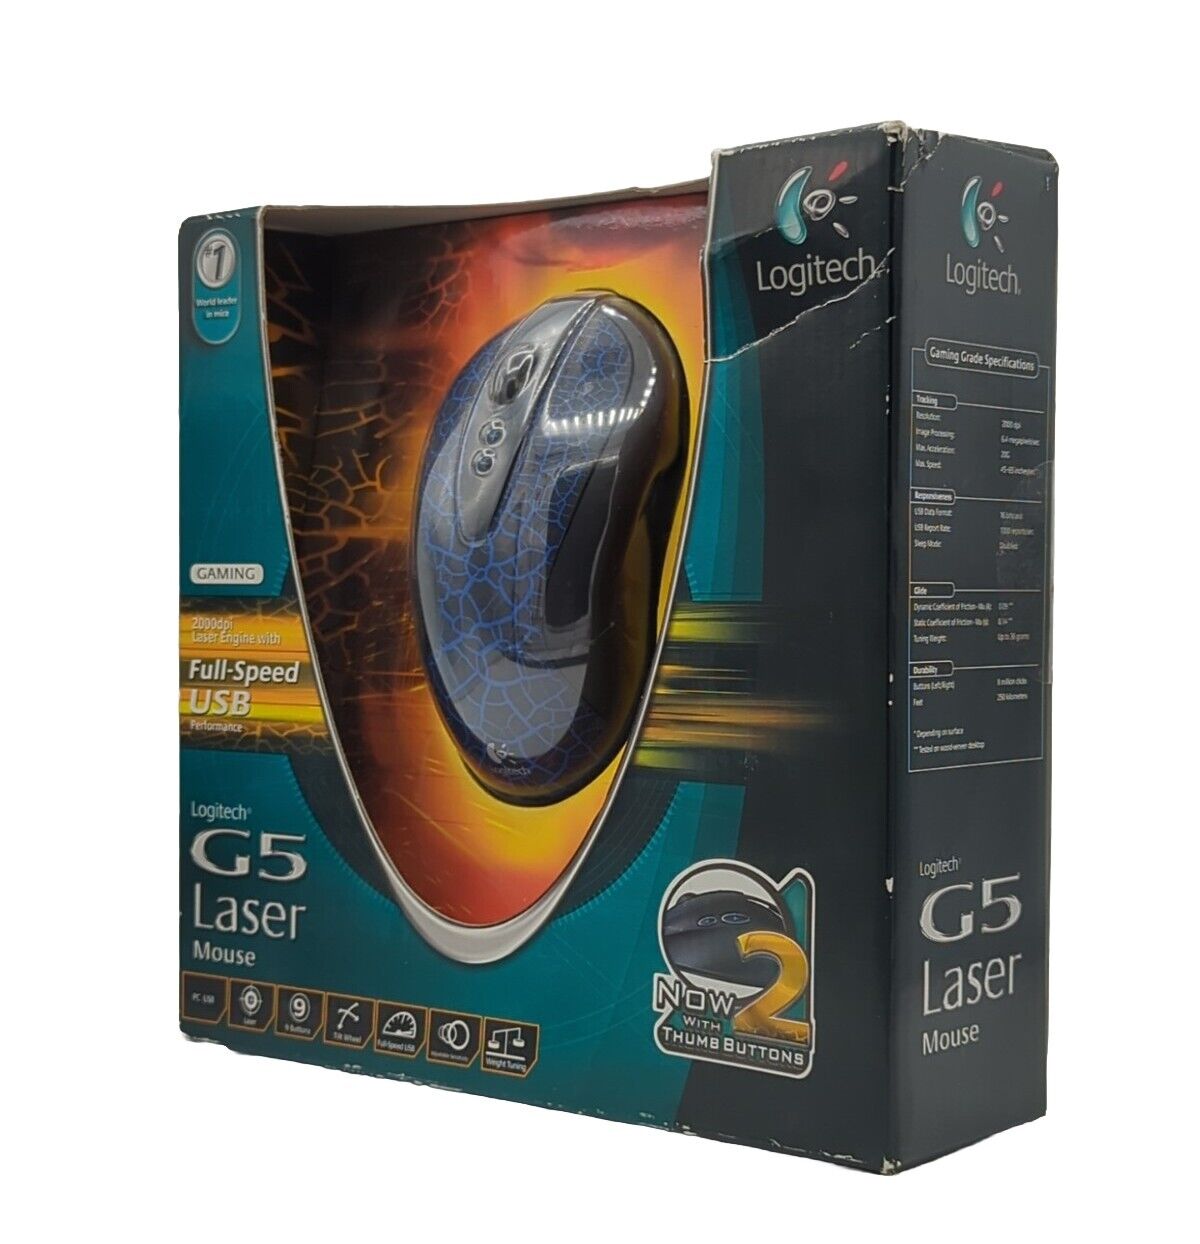 Logitech G5 Laser Gaming Mouse 2000dpi NEW SEALED-*New Old Stock*-RARE FIND 2007